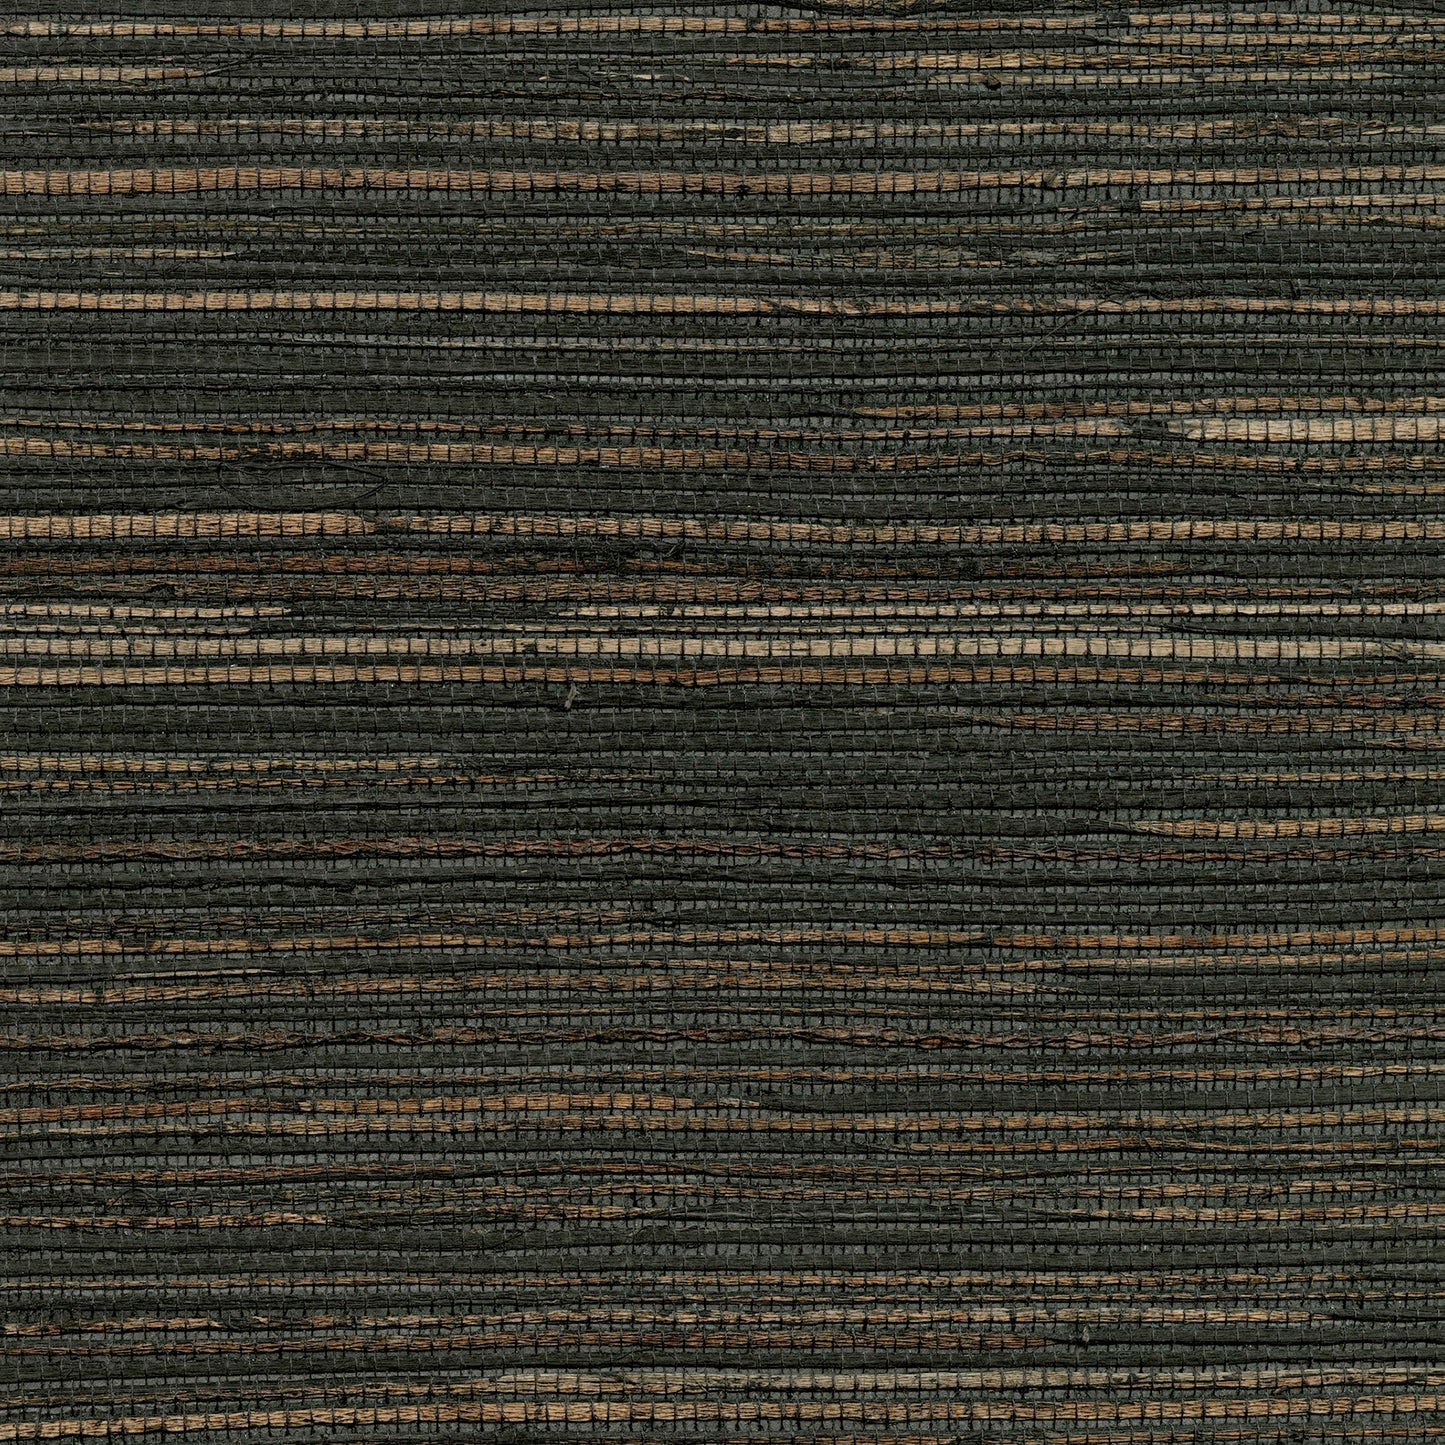 Buy 4018-0035 Grasscloth Portfolio Shandong Charcoal Ramie Grasscloth Charcoal by Advantage